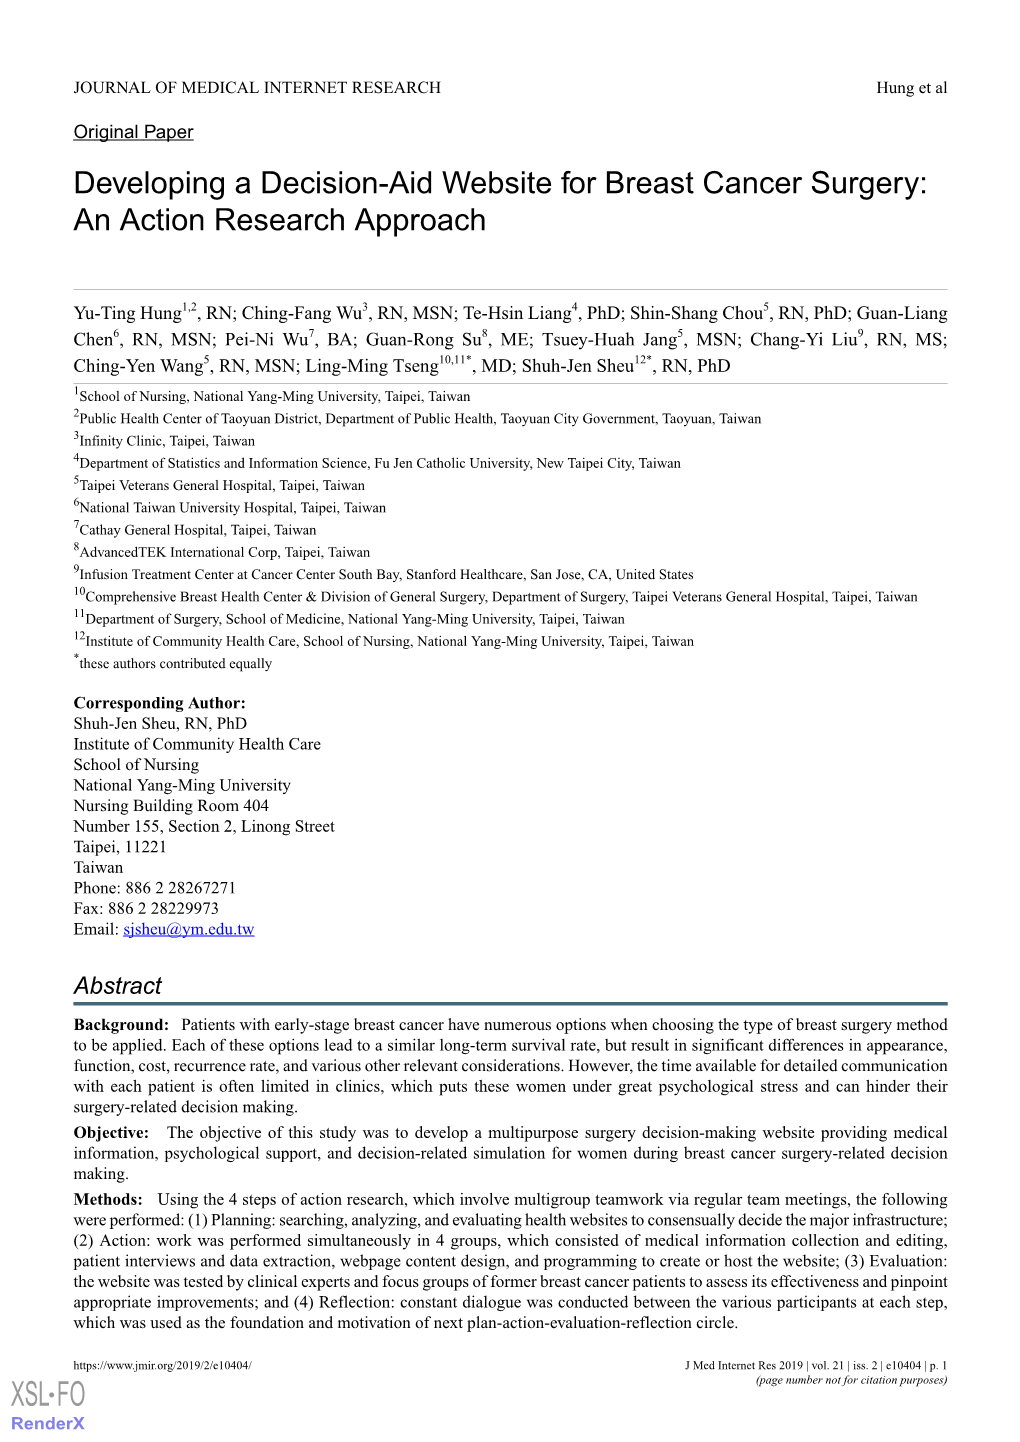 Developing a Decision-Aid Website for Breast Cancer Surgery: an Action Research Approach